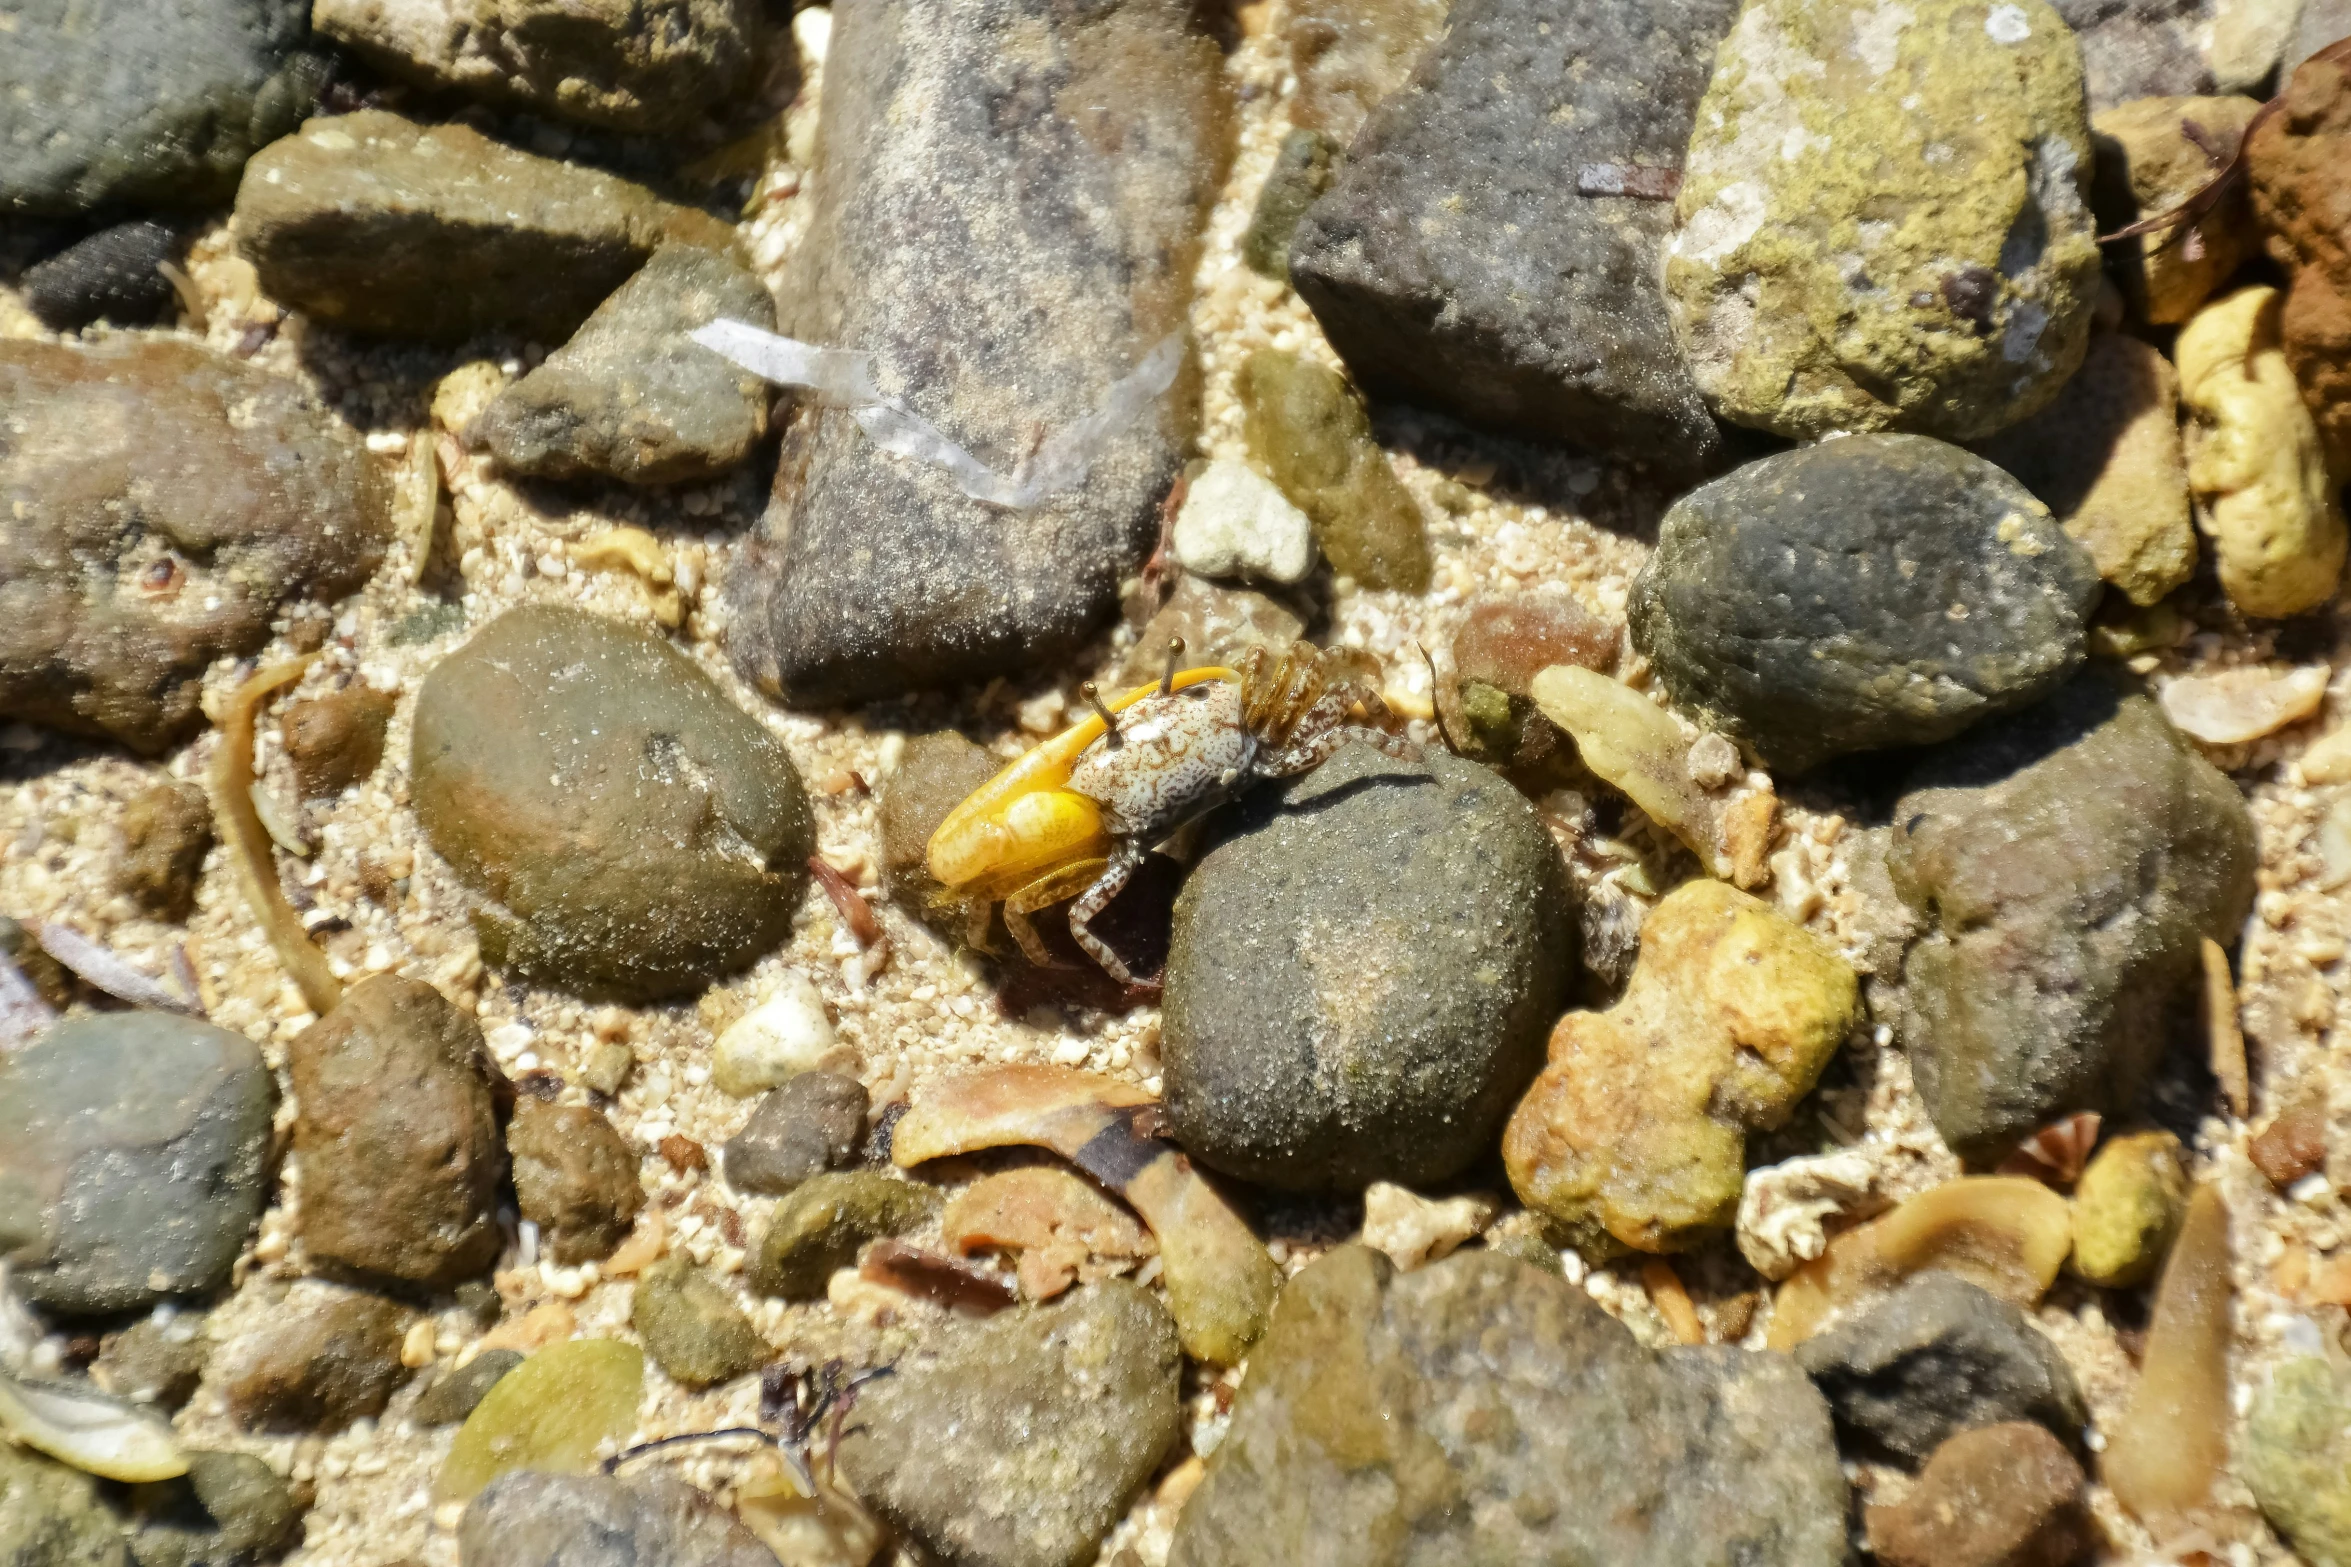 this is a bug crawling among the rocks